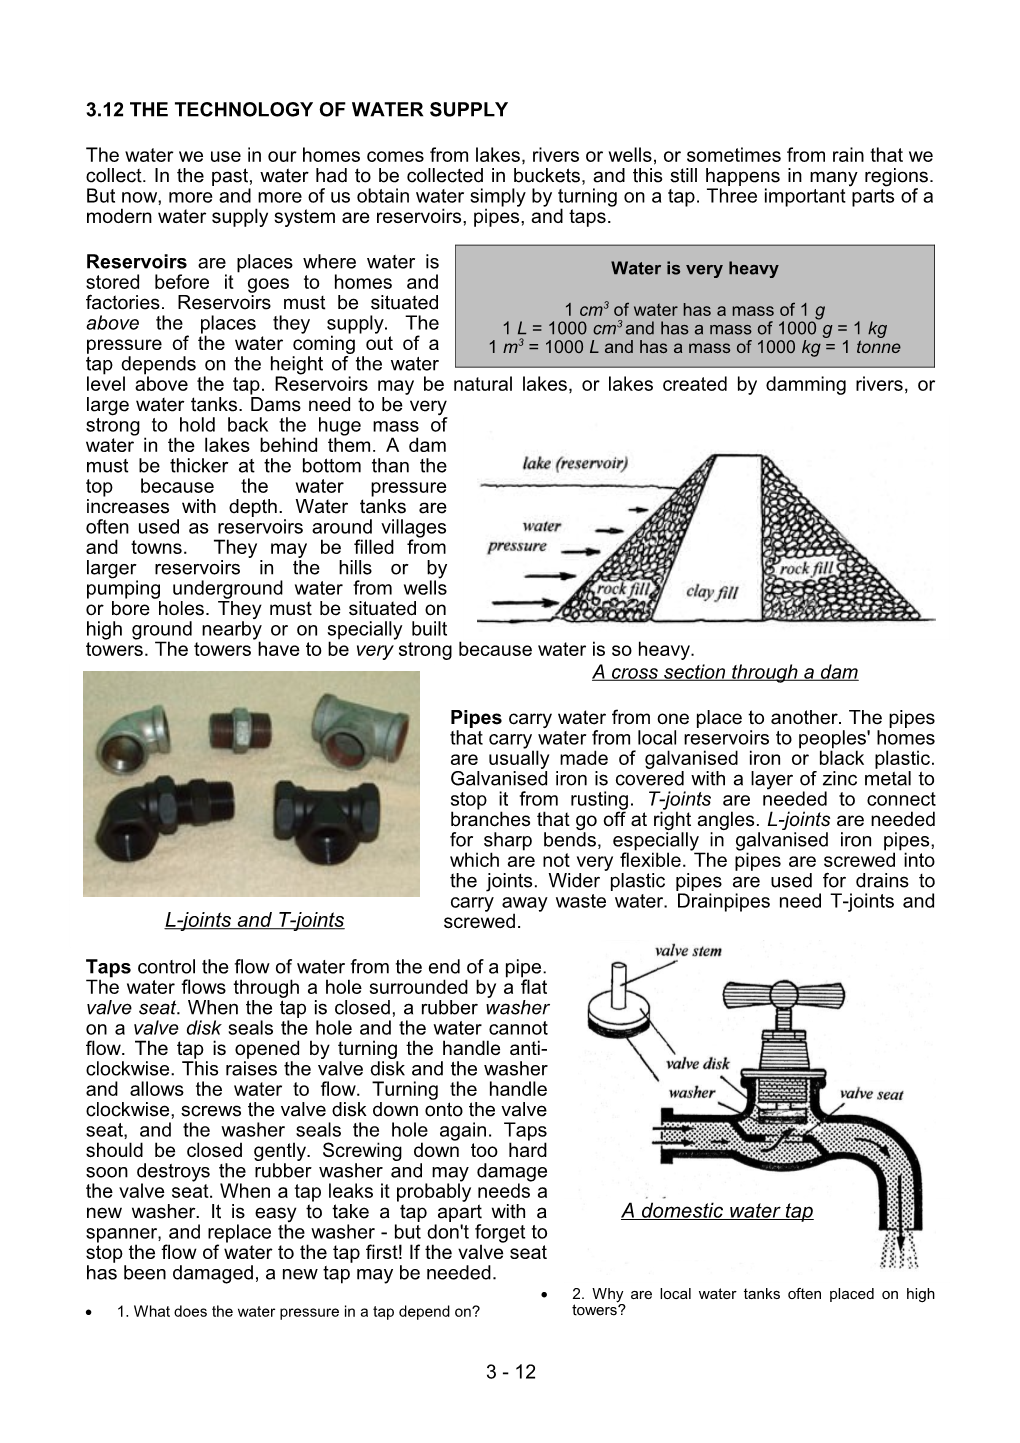 3.12 the Technology of Water Supply